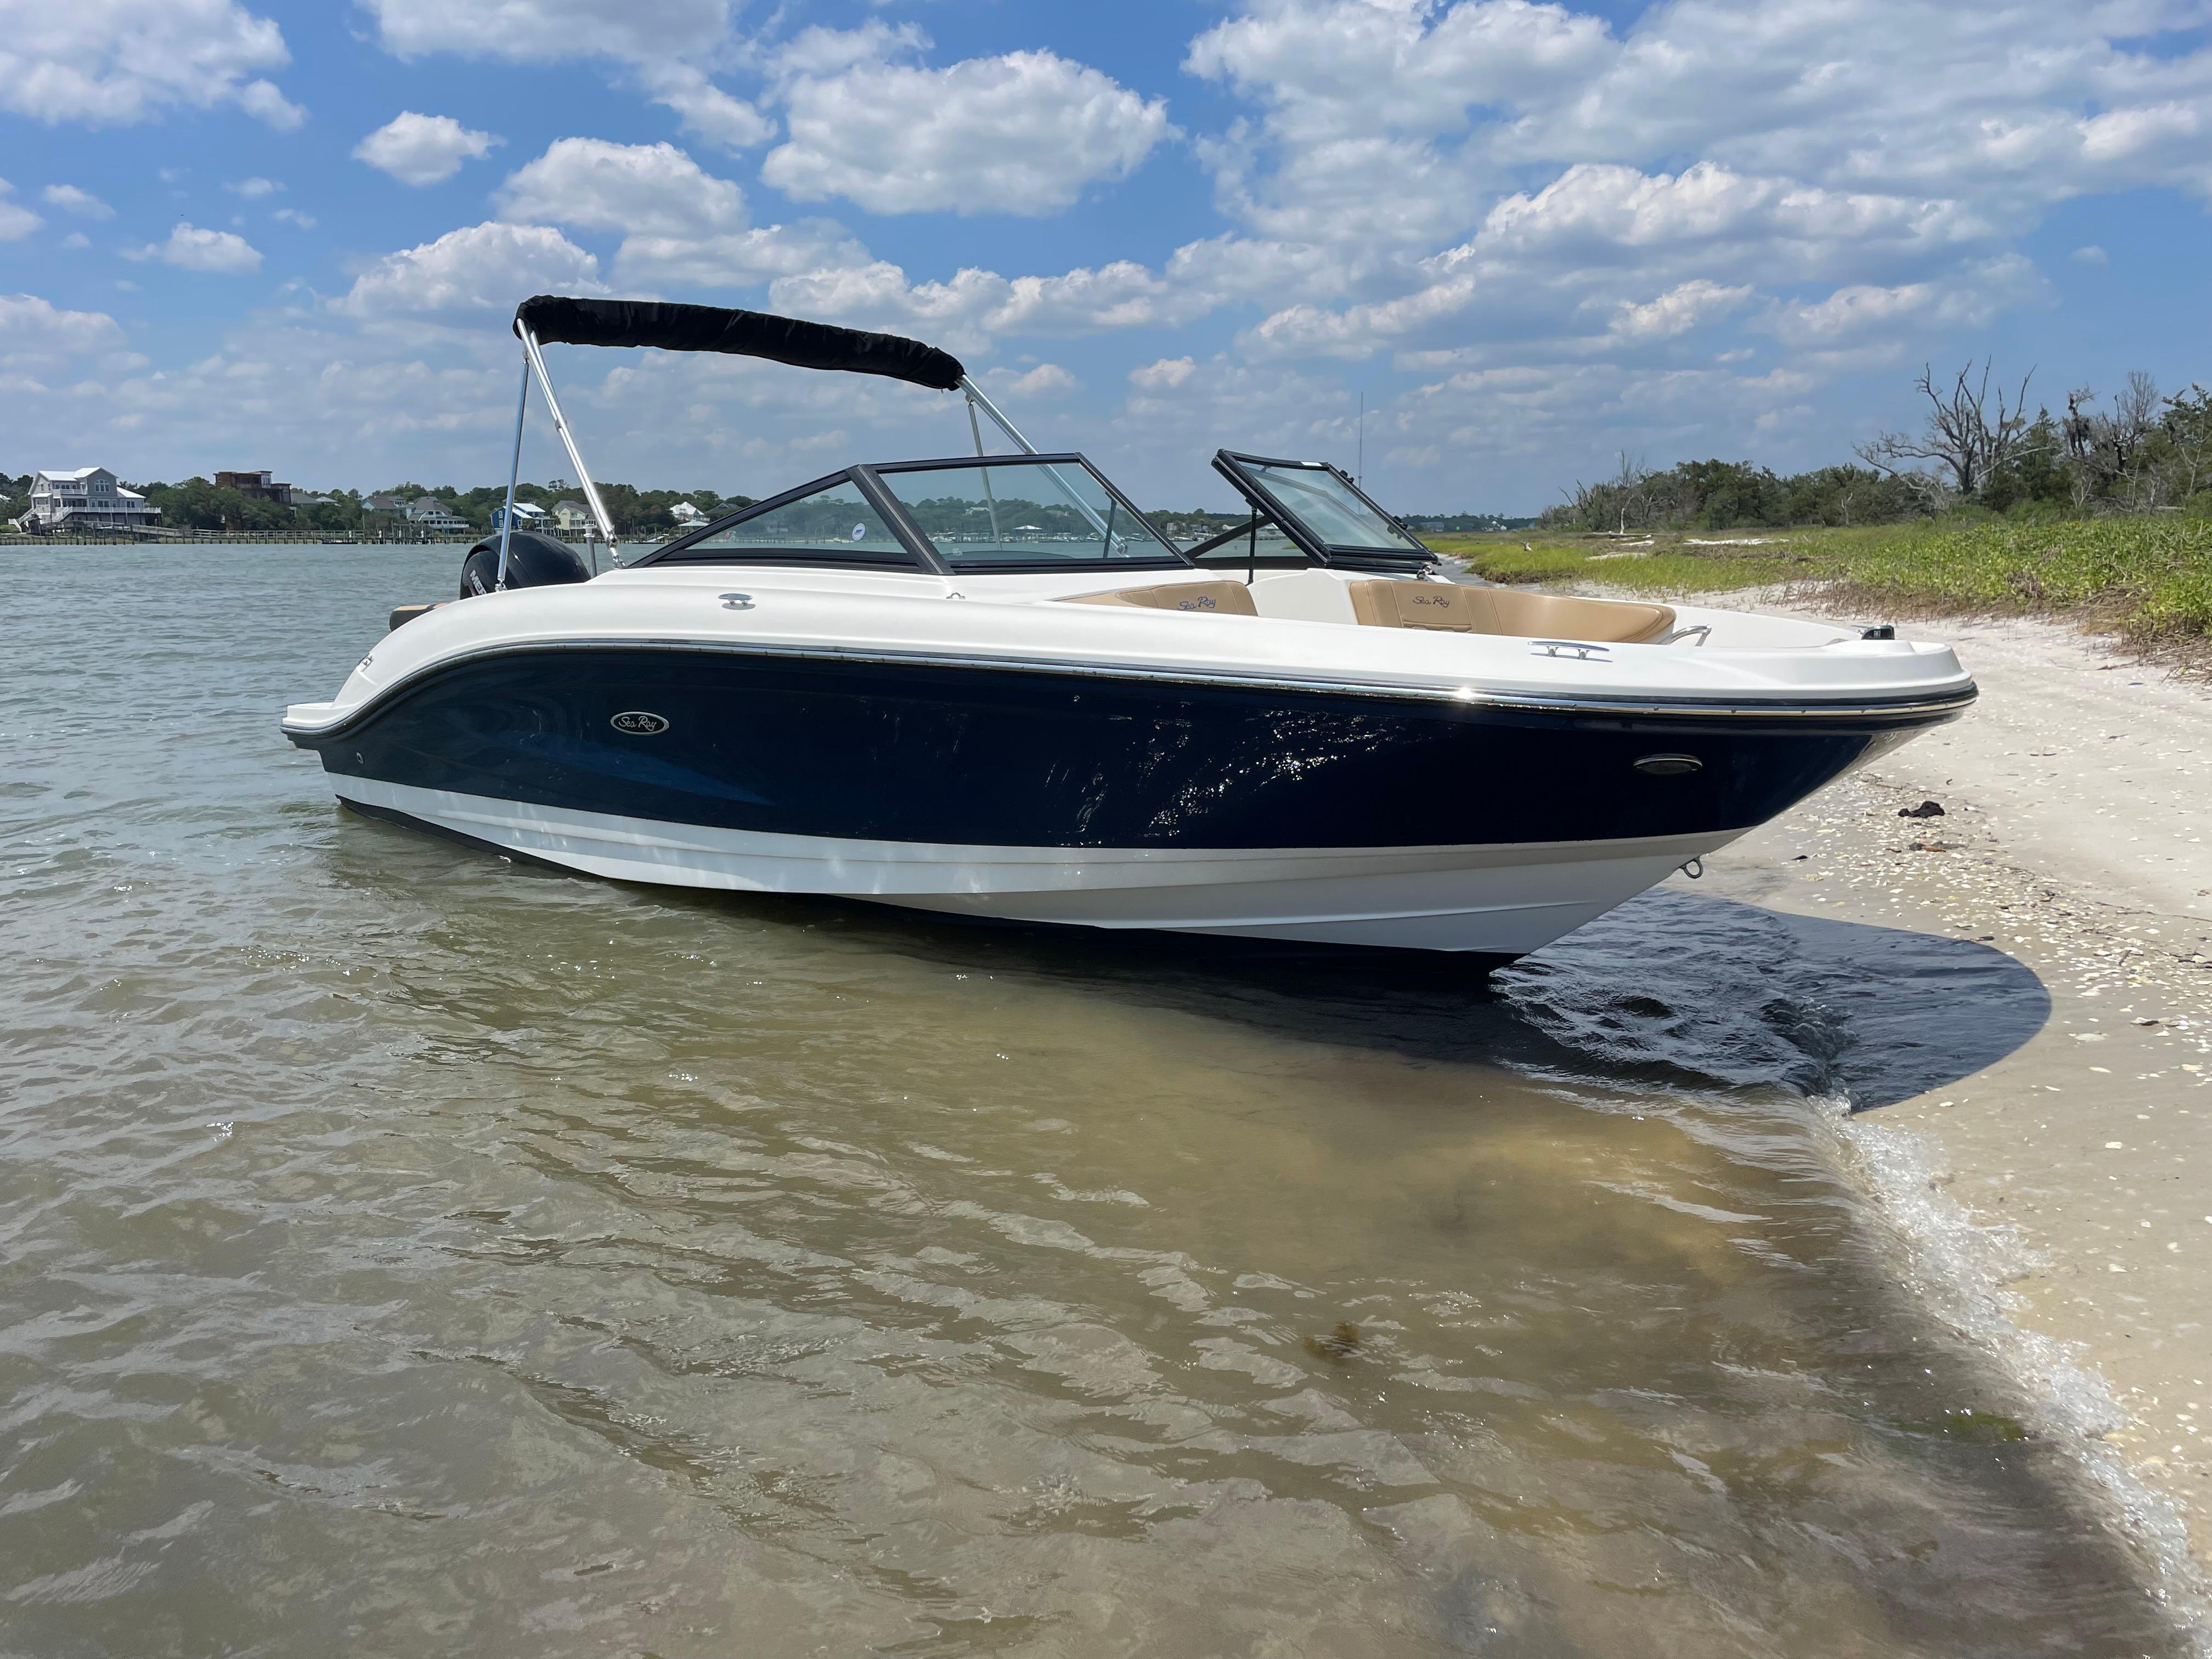 Page 10 of 14 - Sea Ray 210 Spx boats for sale 